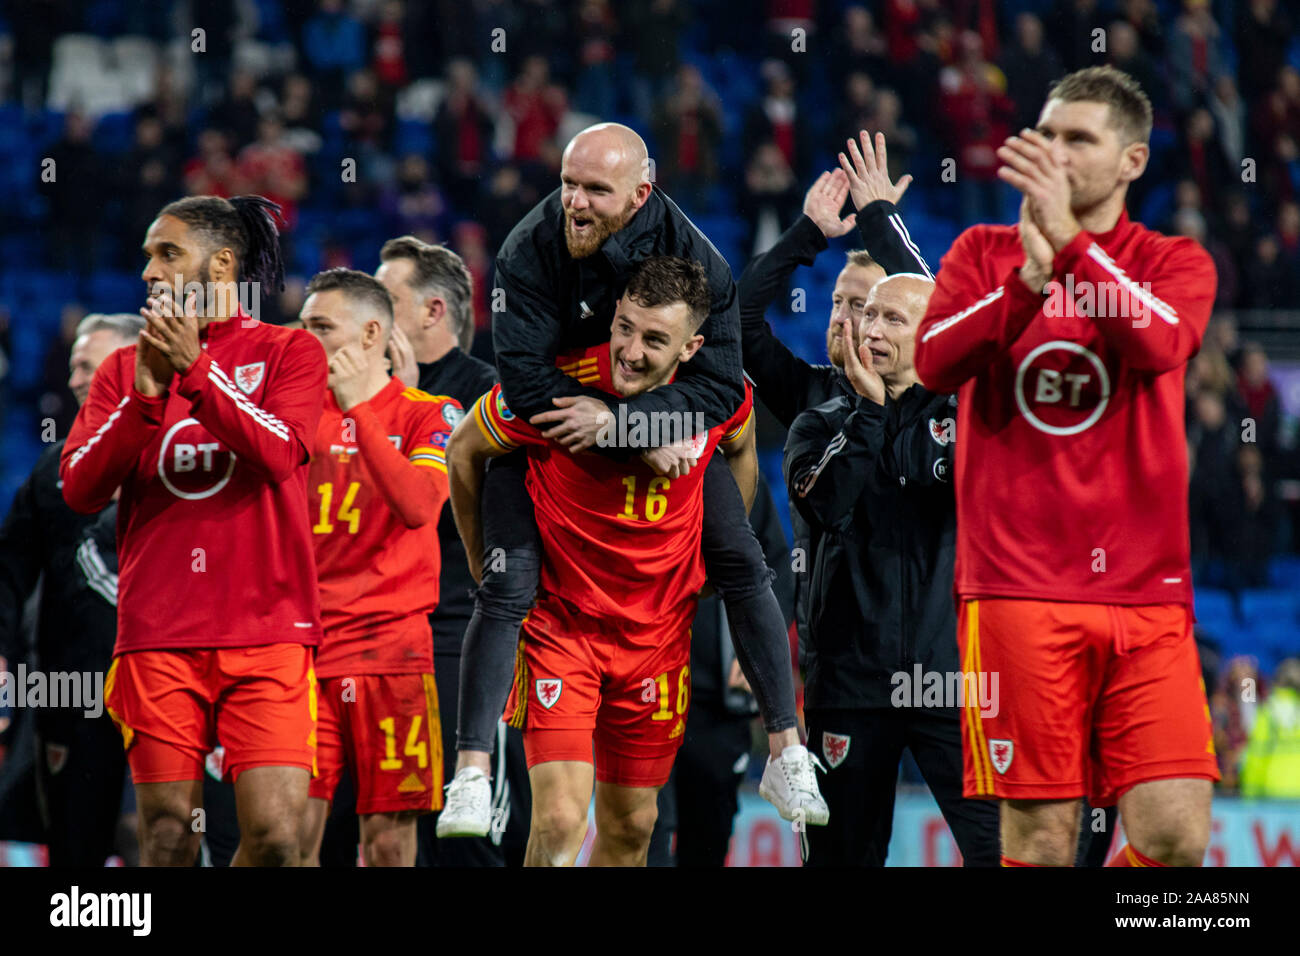 Cardiff, UK. 19th Nov, 2019. Wales players celebrate qualification. UEFA Euro 2020 qualifier group E match, Wales v Hungary at the Cardiff city Stadium in Cardiff, South Wales on Tuesday 19th November 2019. pic by Lewis Mitchell/Andrew Orchard sports photography/Alamy live News EDITORIAL USE ONLY Credit: Andrew Orchard sports photography/Alamy Live News Stock Photo